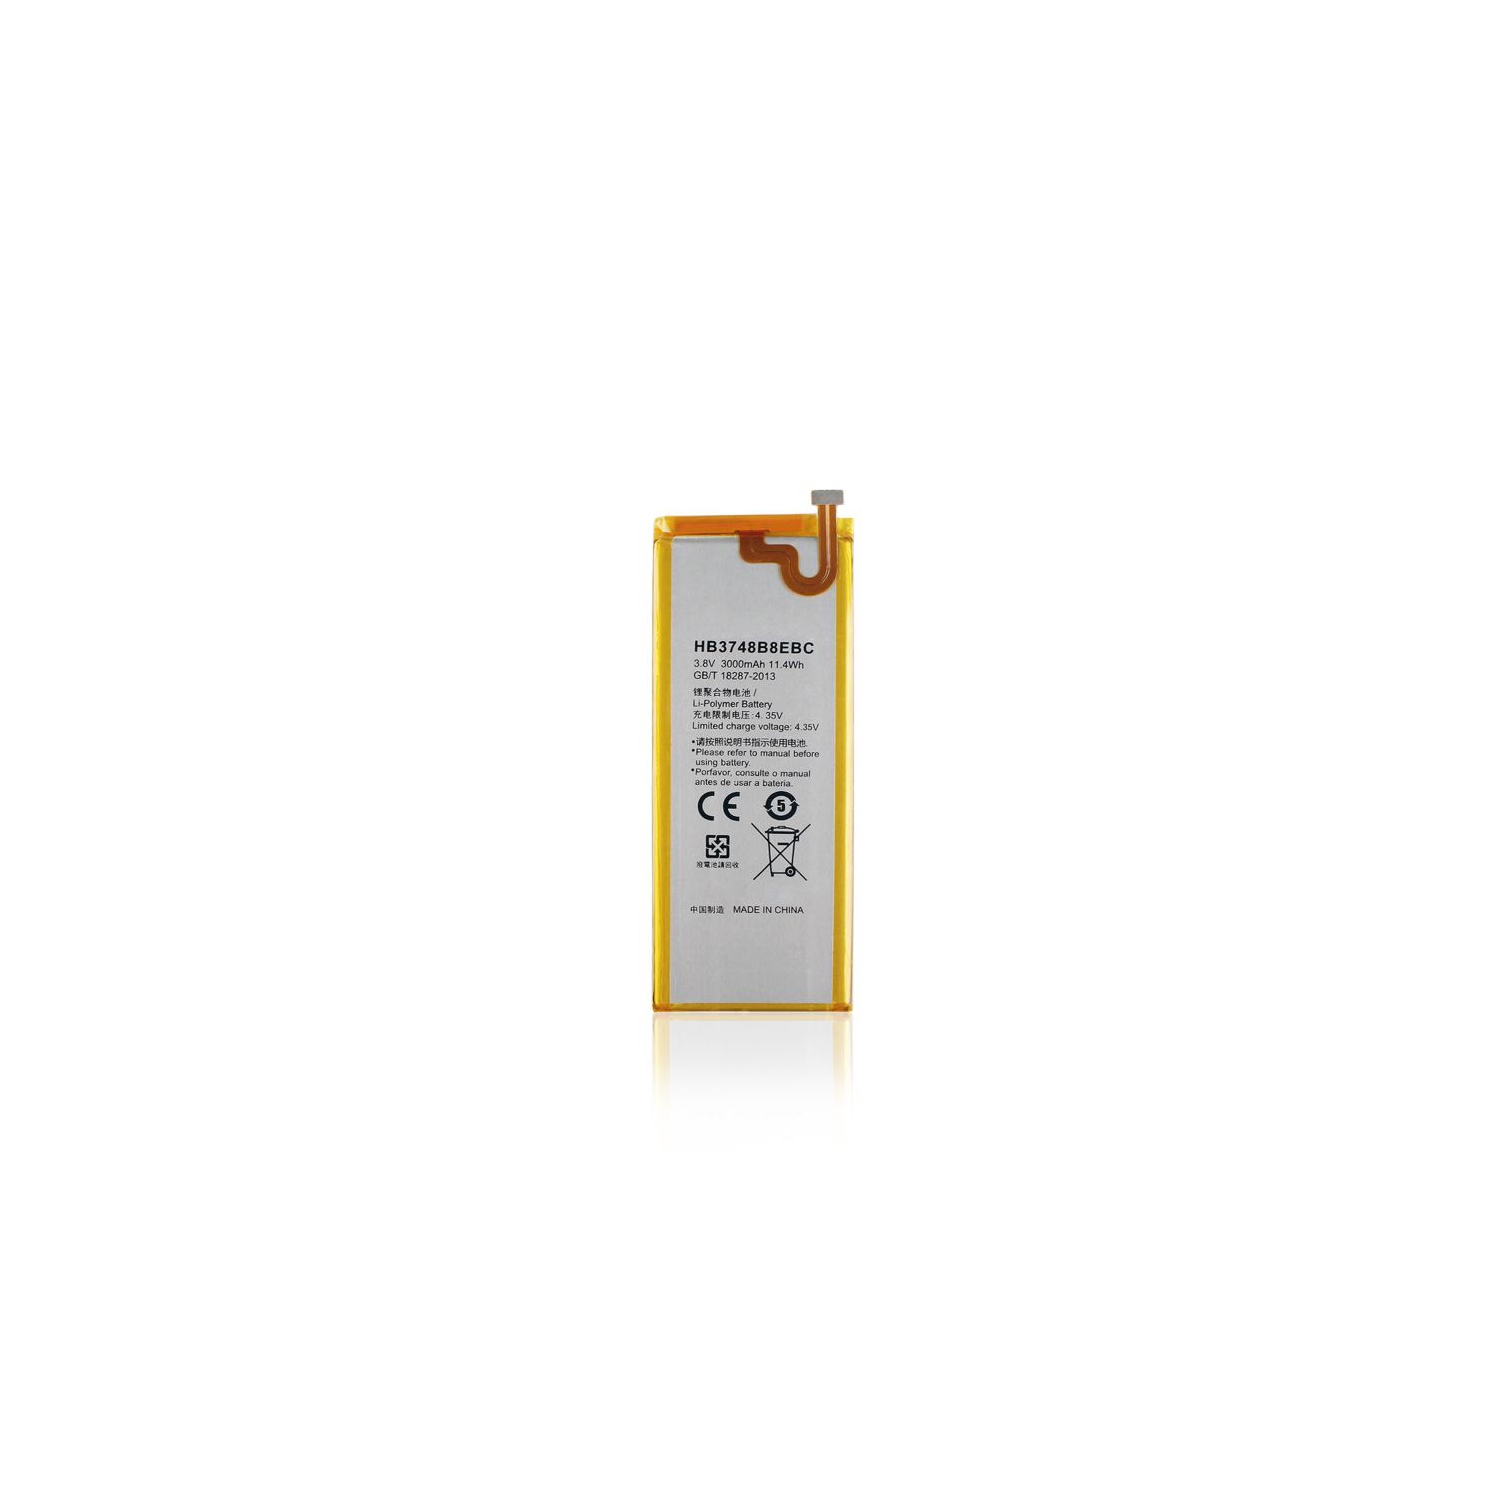 Replacement Replacement Battery Compatible For Huawei Nexus G7 (G7-TL100) (HB3748B8EBC)